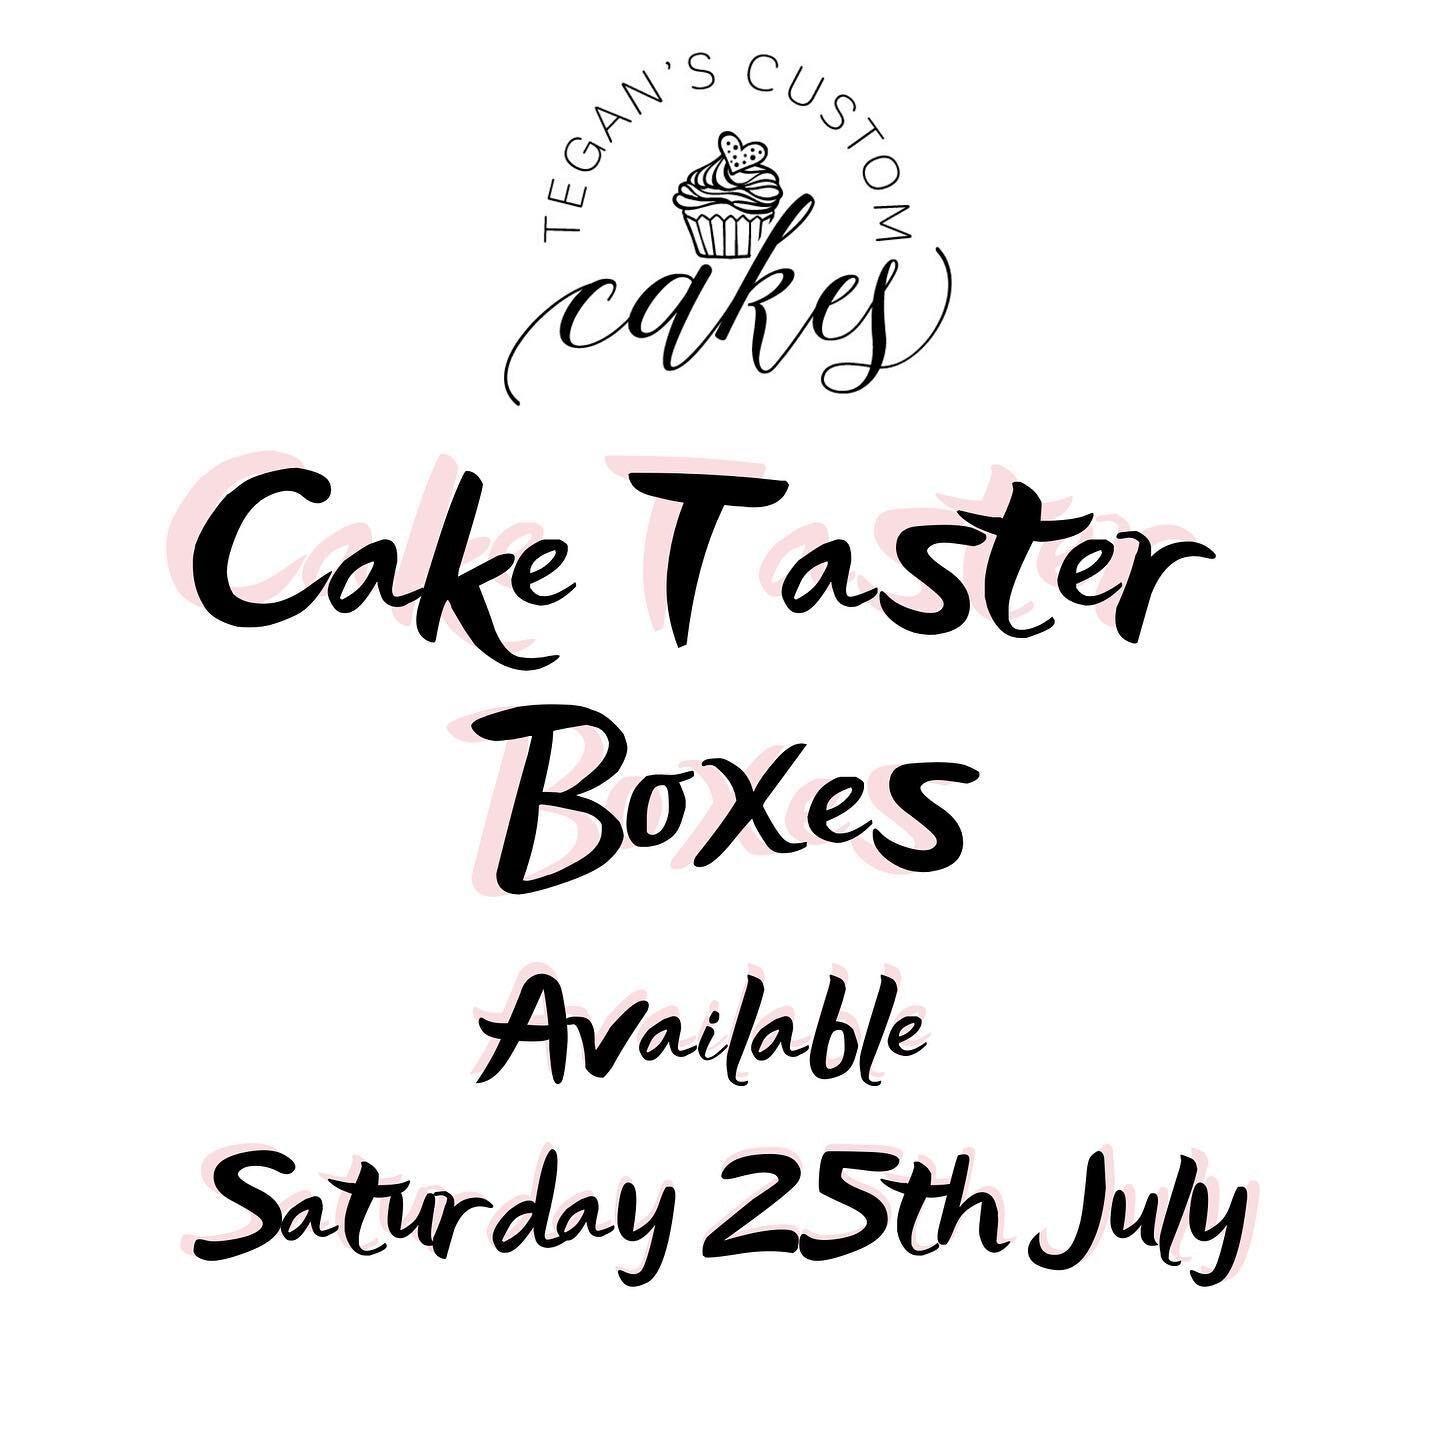 Cake Taster Boxes ✨ 
If you have a wedding, birthday, or event coming up and you&rsquo;d like to try my yummy flavours first 😋 shoot me a message to secure a taster cupcake box of my most popular delicious cake flavours!! 🧁🧁🧁
I don&rsquo;t do the